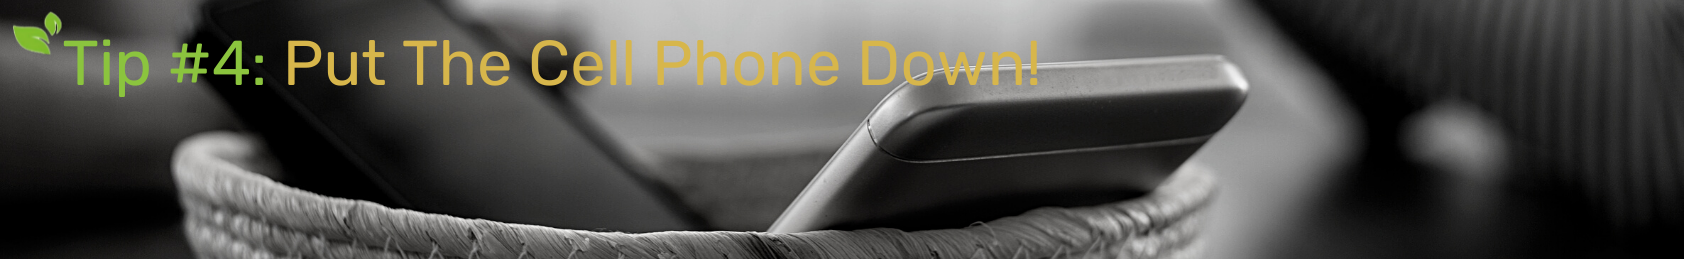 Tip #4: Put The Cell Phone Down